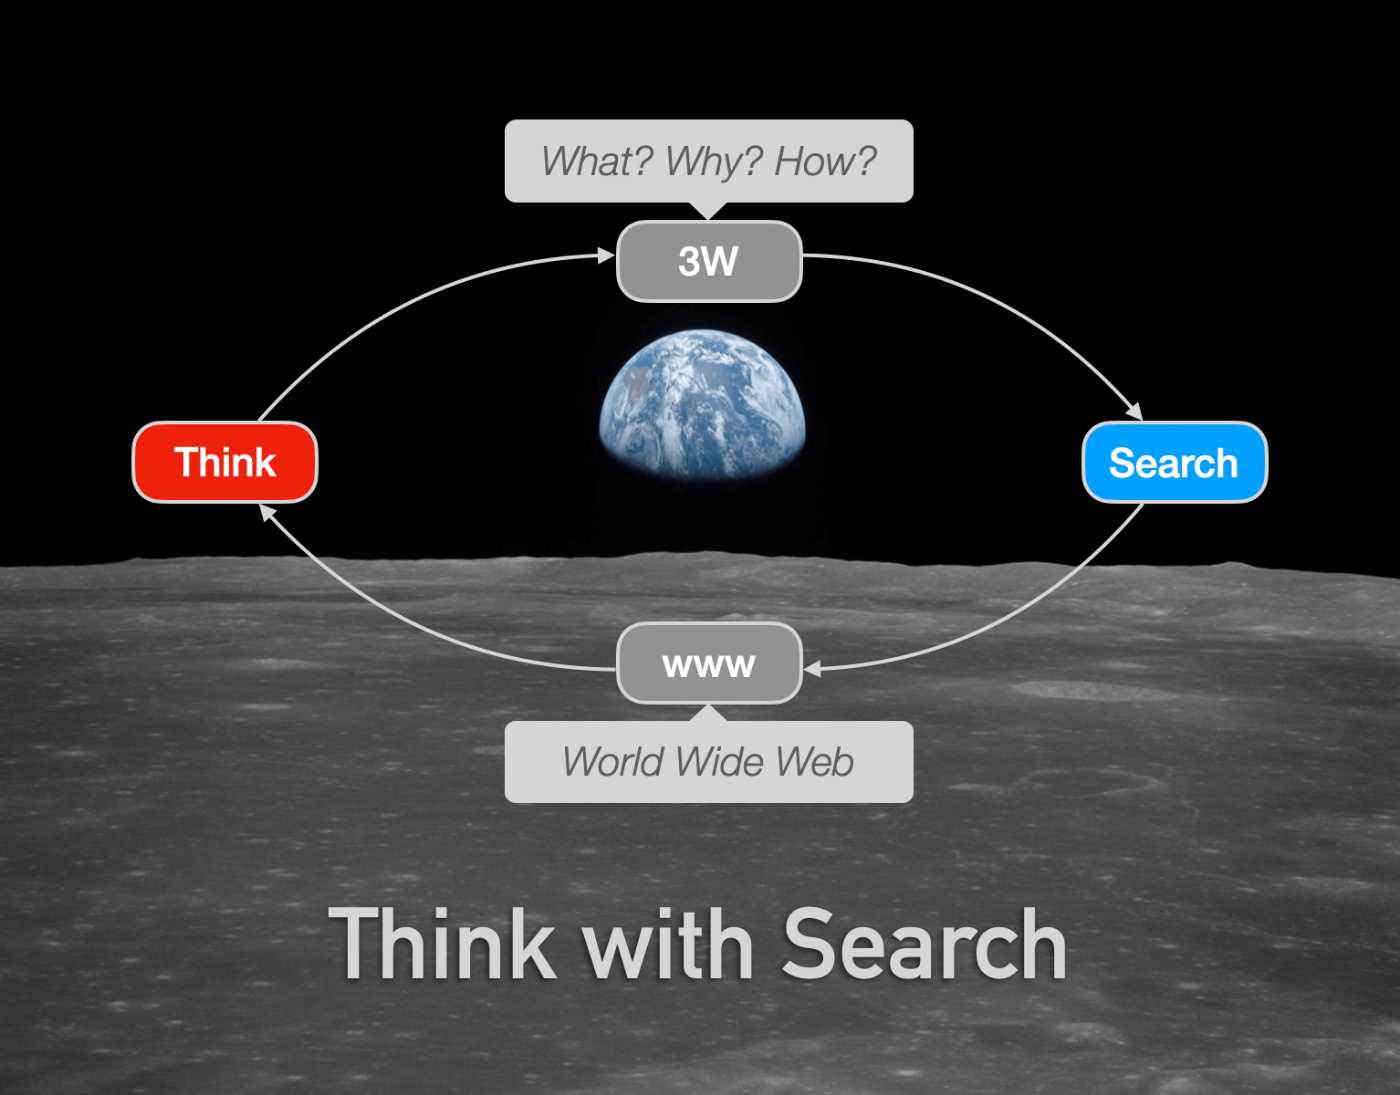 Think with Search